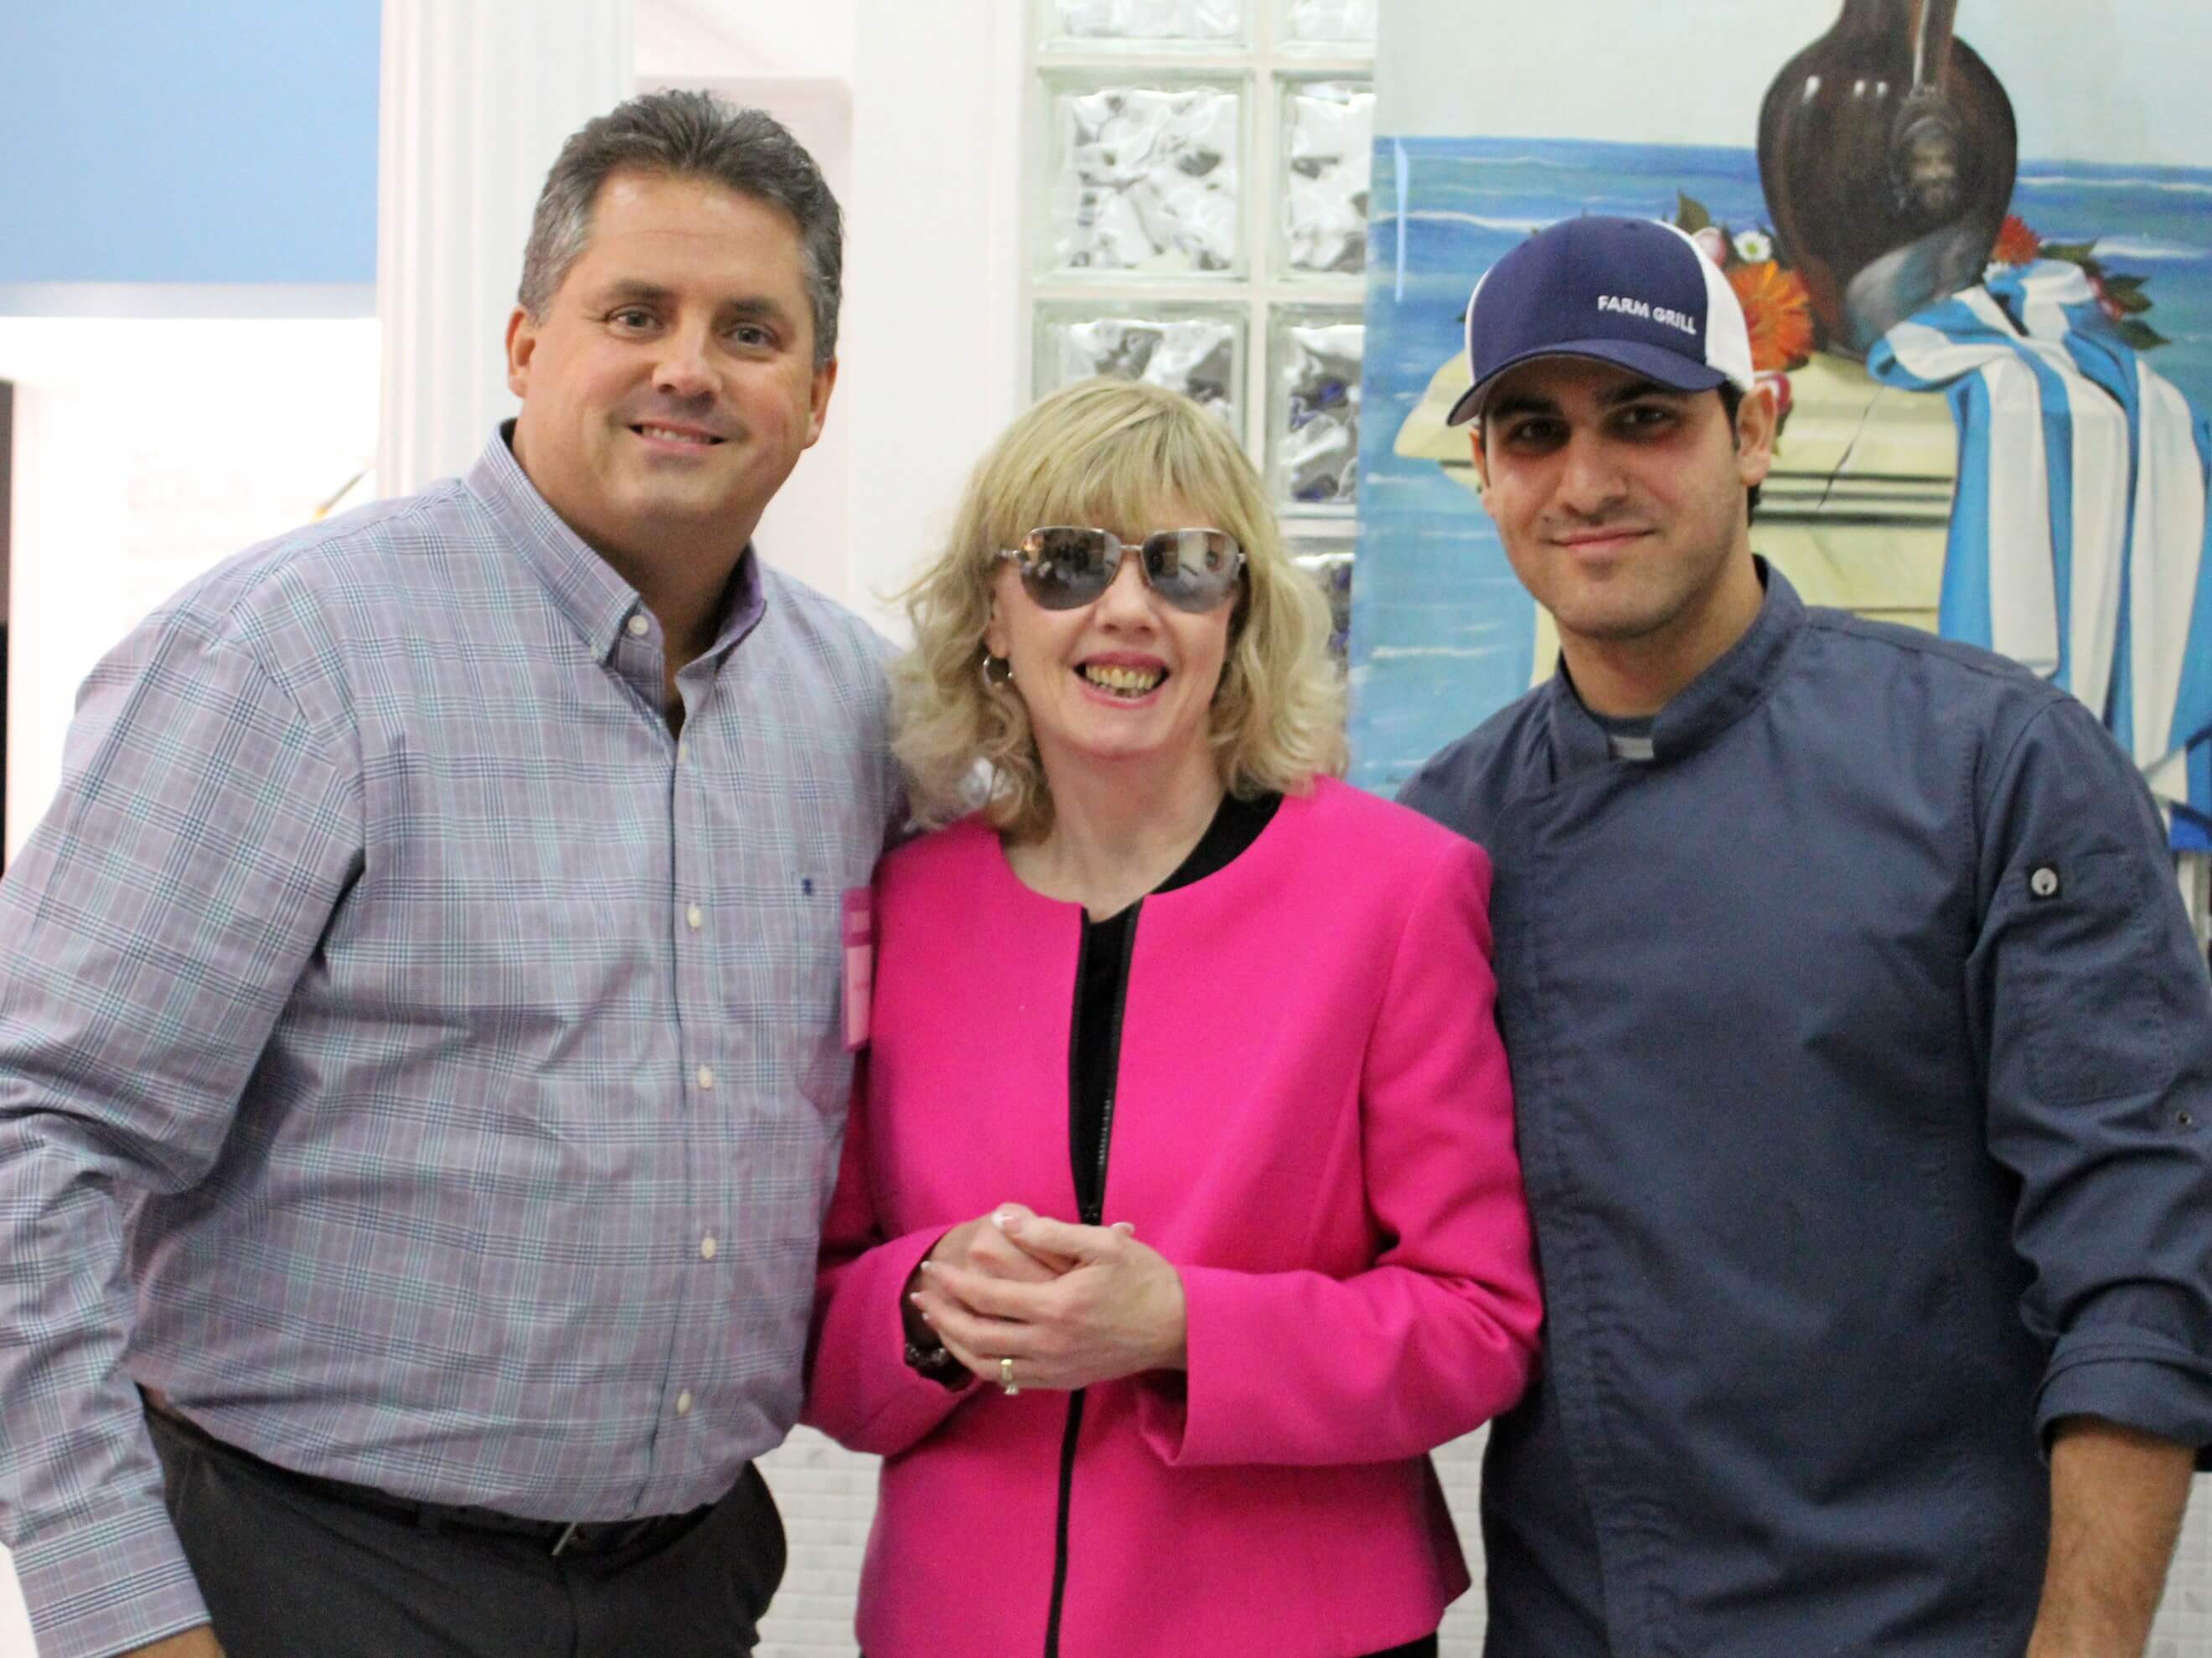 From left to right; Gregory J. Donnelly, President and CEO of the Carroll Center for the Blind; Maura Mazzocca, Personal Management Instructor at the Carroll Center for the Blind; Alex Iliades, Owner of Farm Grill & Rotisserie.